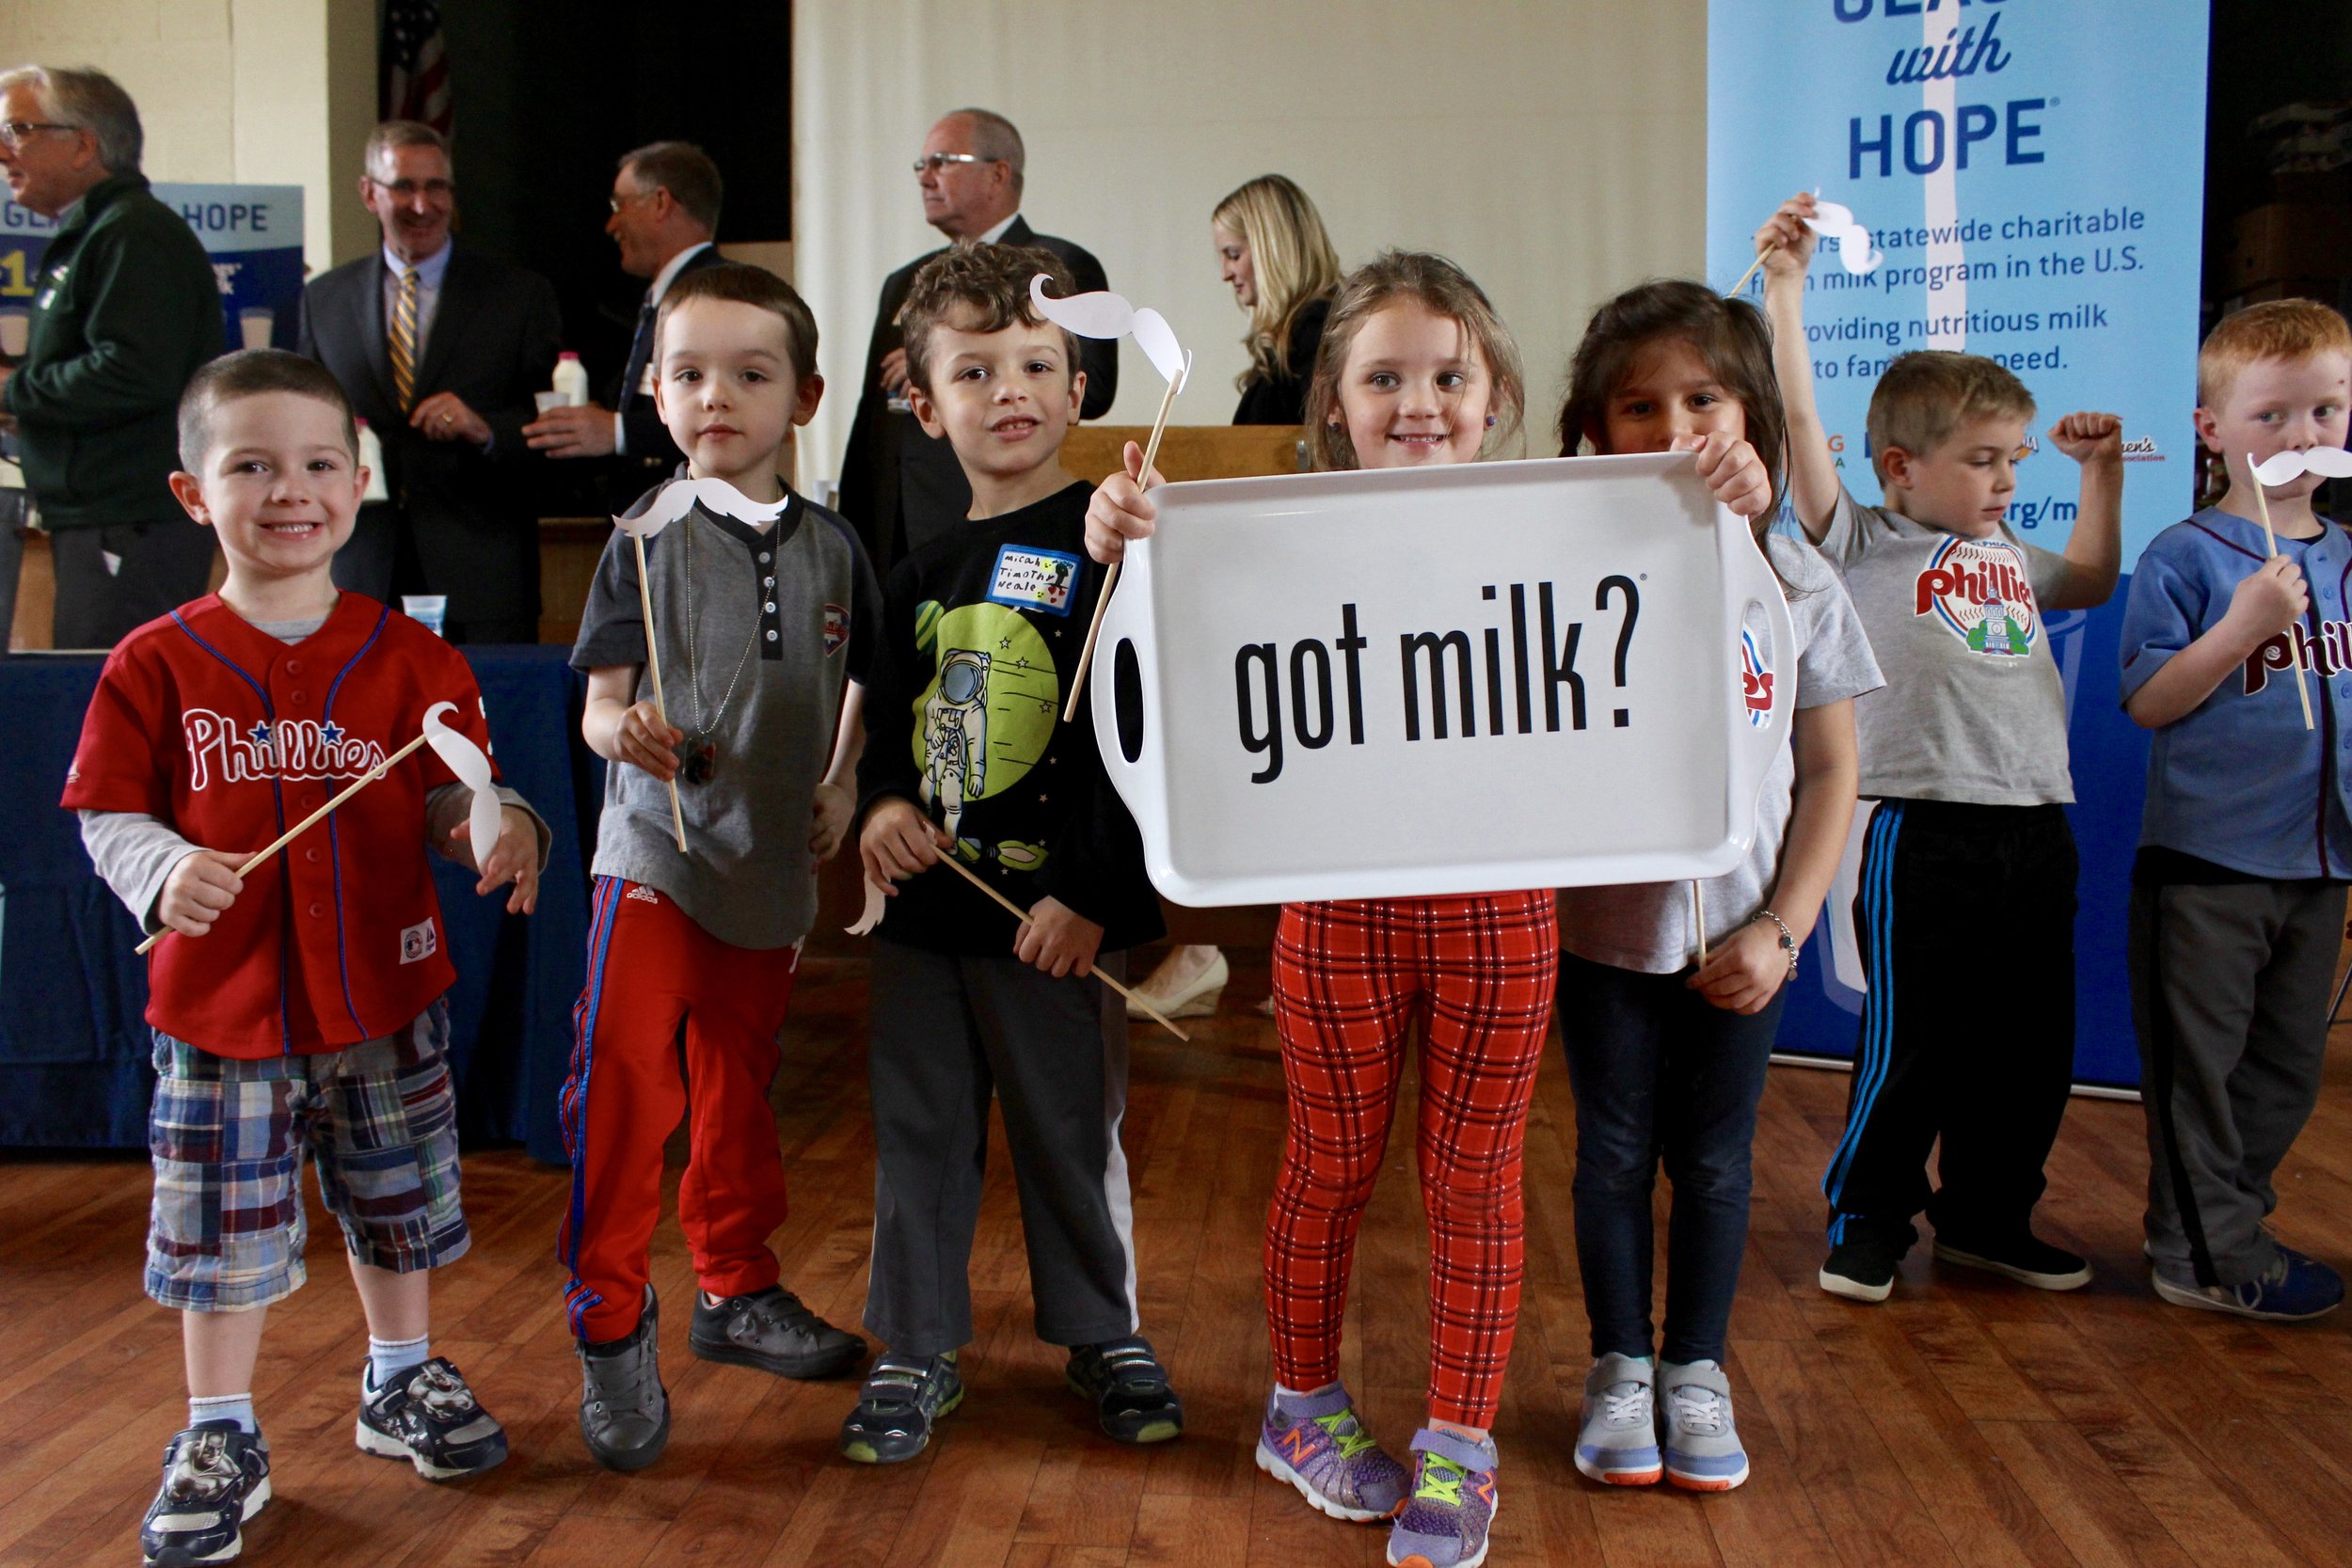 Alt text: five little kids stand together while holding photobooth props and smiling towards camera. One little girl with light brown hair and bright red leggings holds a sign that reads “got milk?”